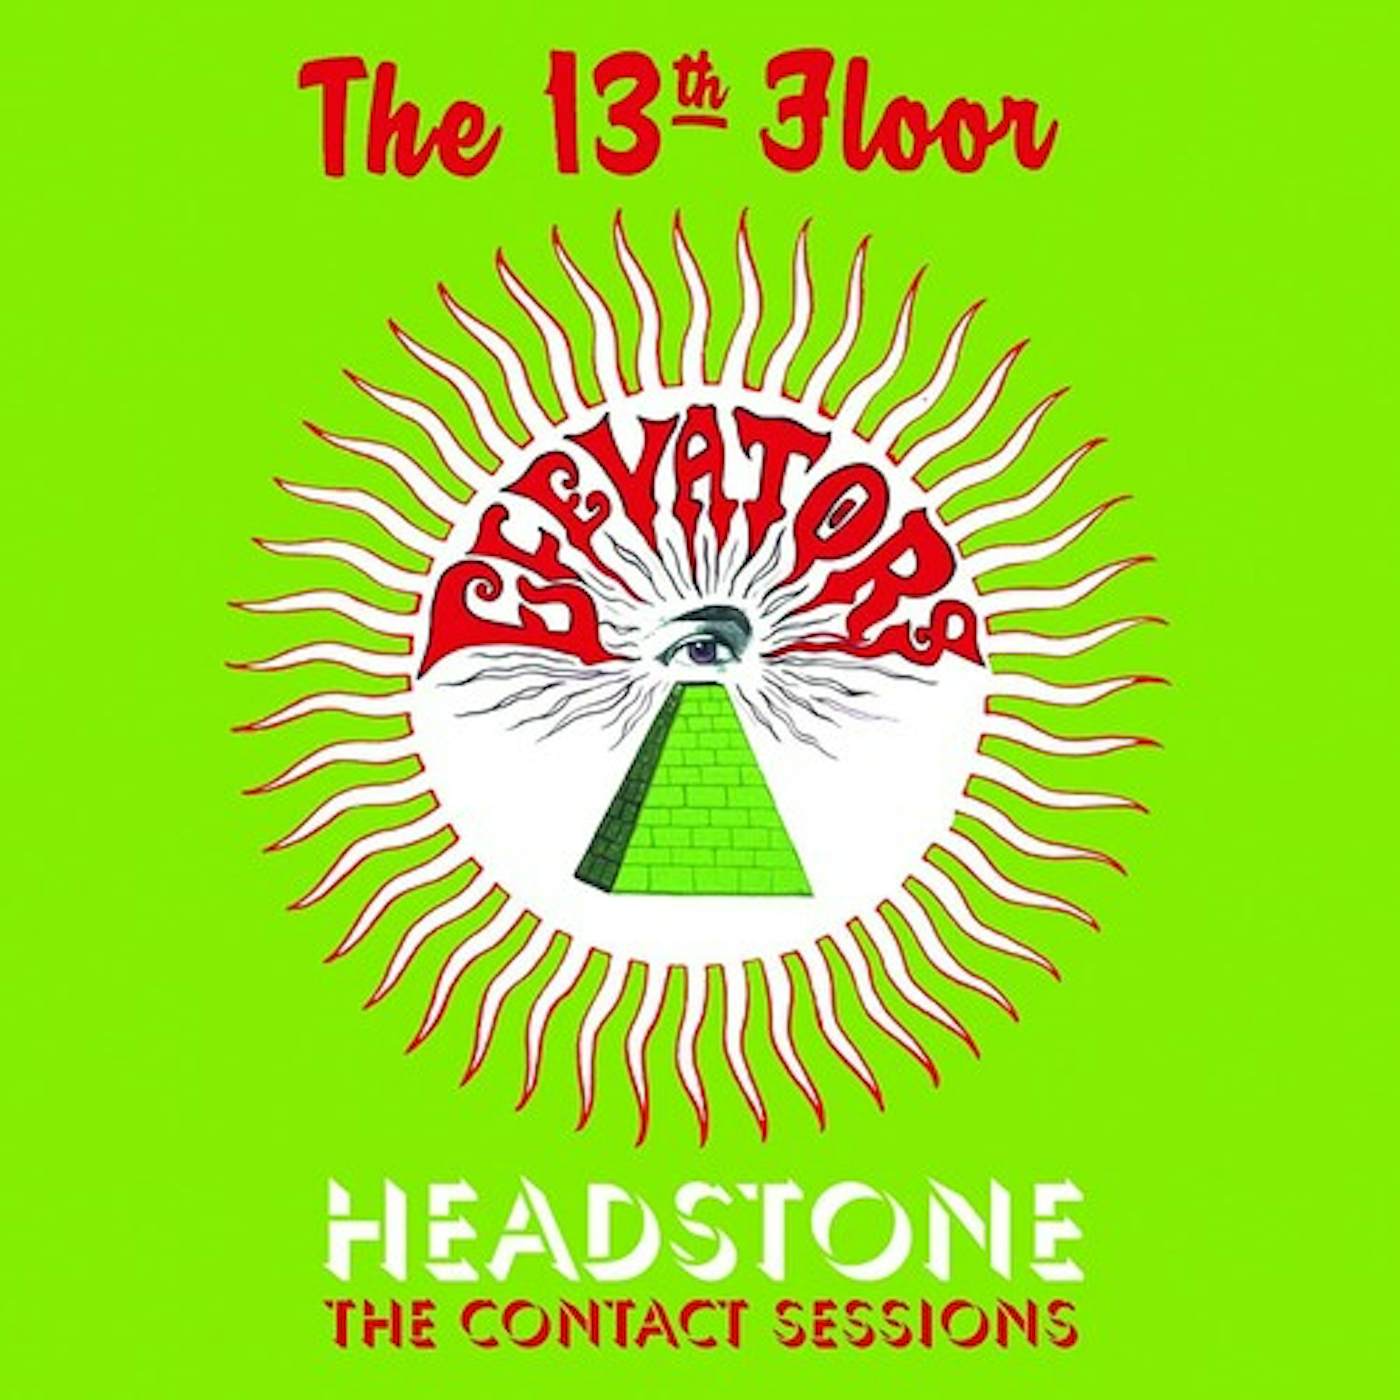 13th Floor Elevators HEADSTONE: THE CONTACT SESSIONS CD